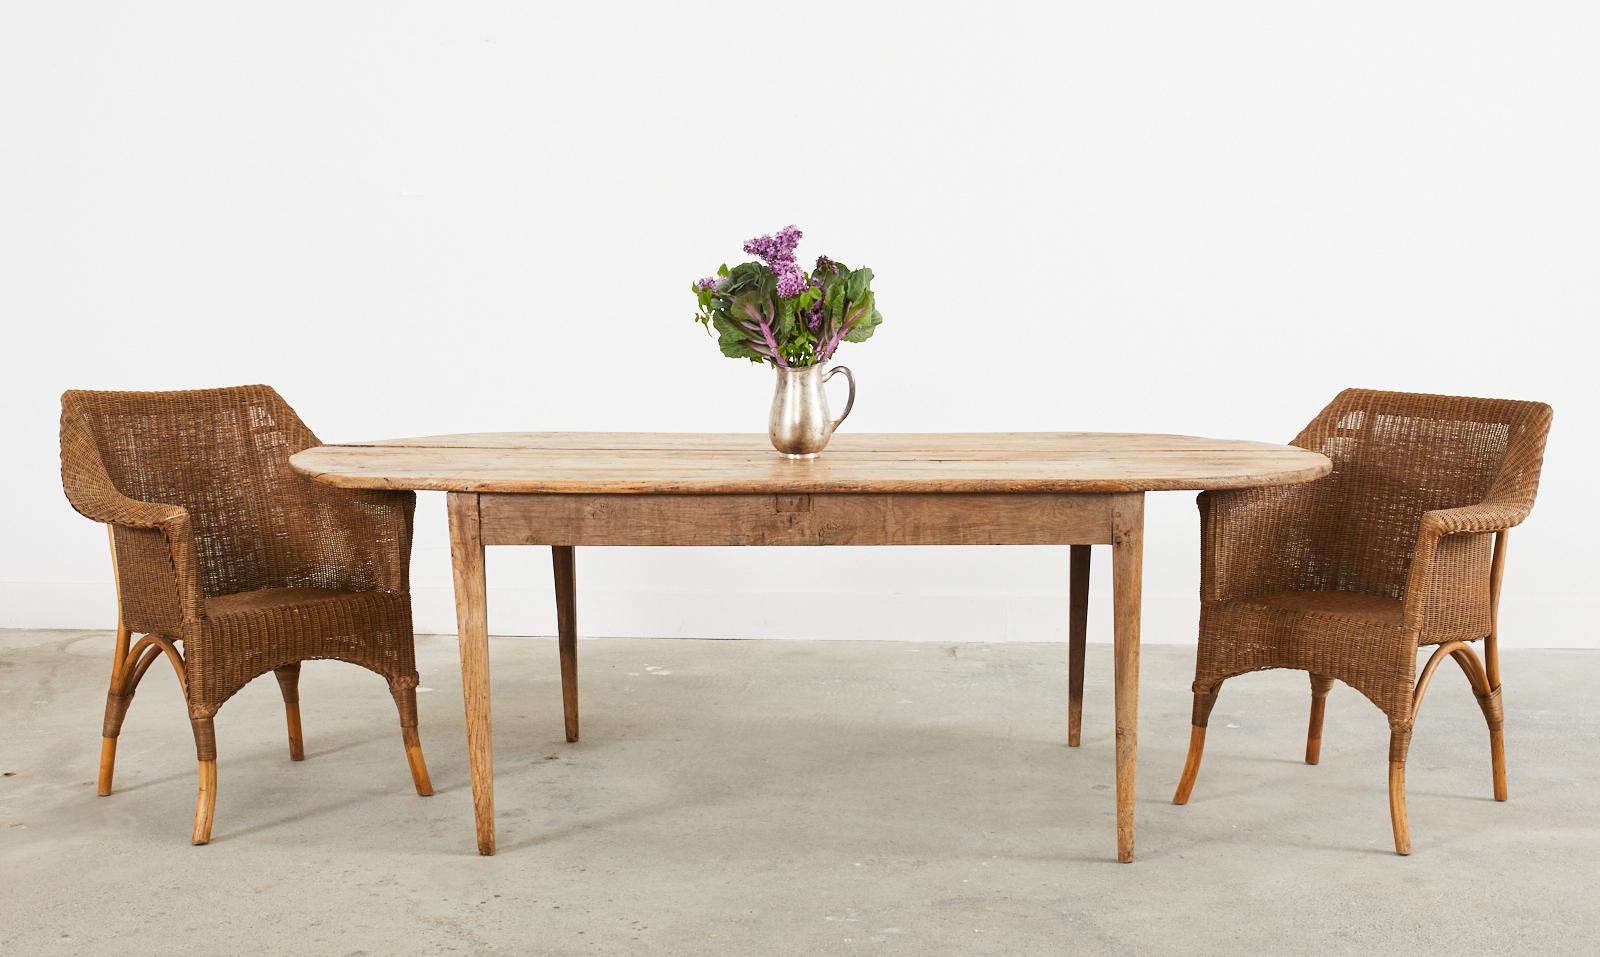 Rustic early 19th century country French provincial farmhouse dining table featuring a patinated oval plank top. The top is crafted from 1 inch thick soft pine boards with tongue and groove joinery. The top is supported by a fruitwood base and later